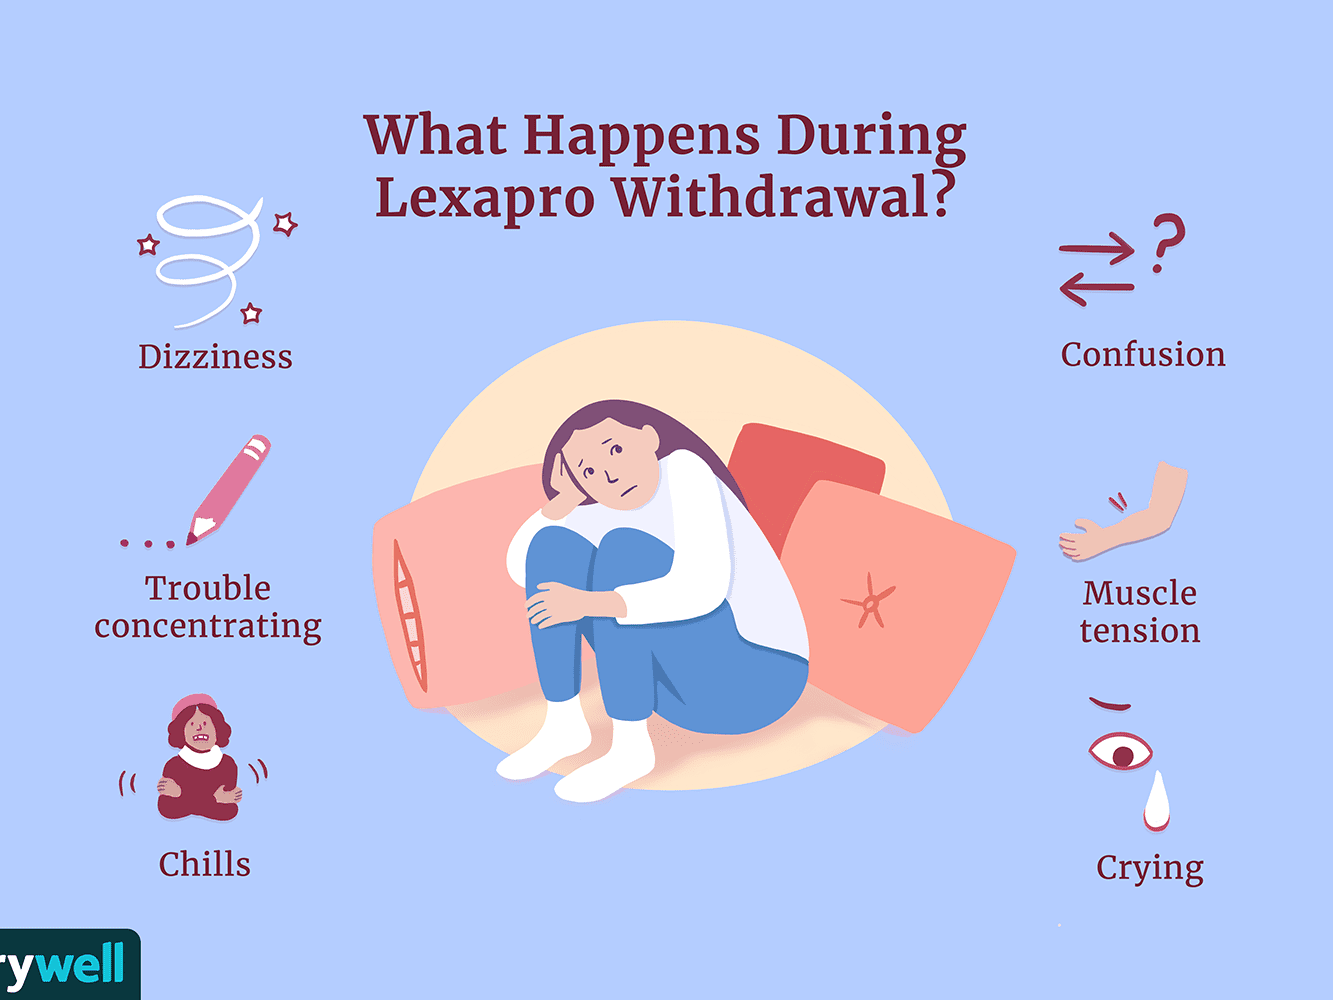 how long does it take for lexapro to work for anxiety